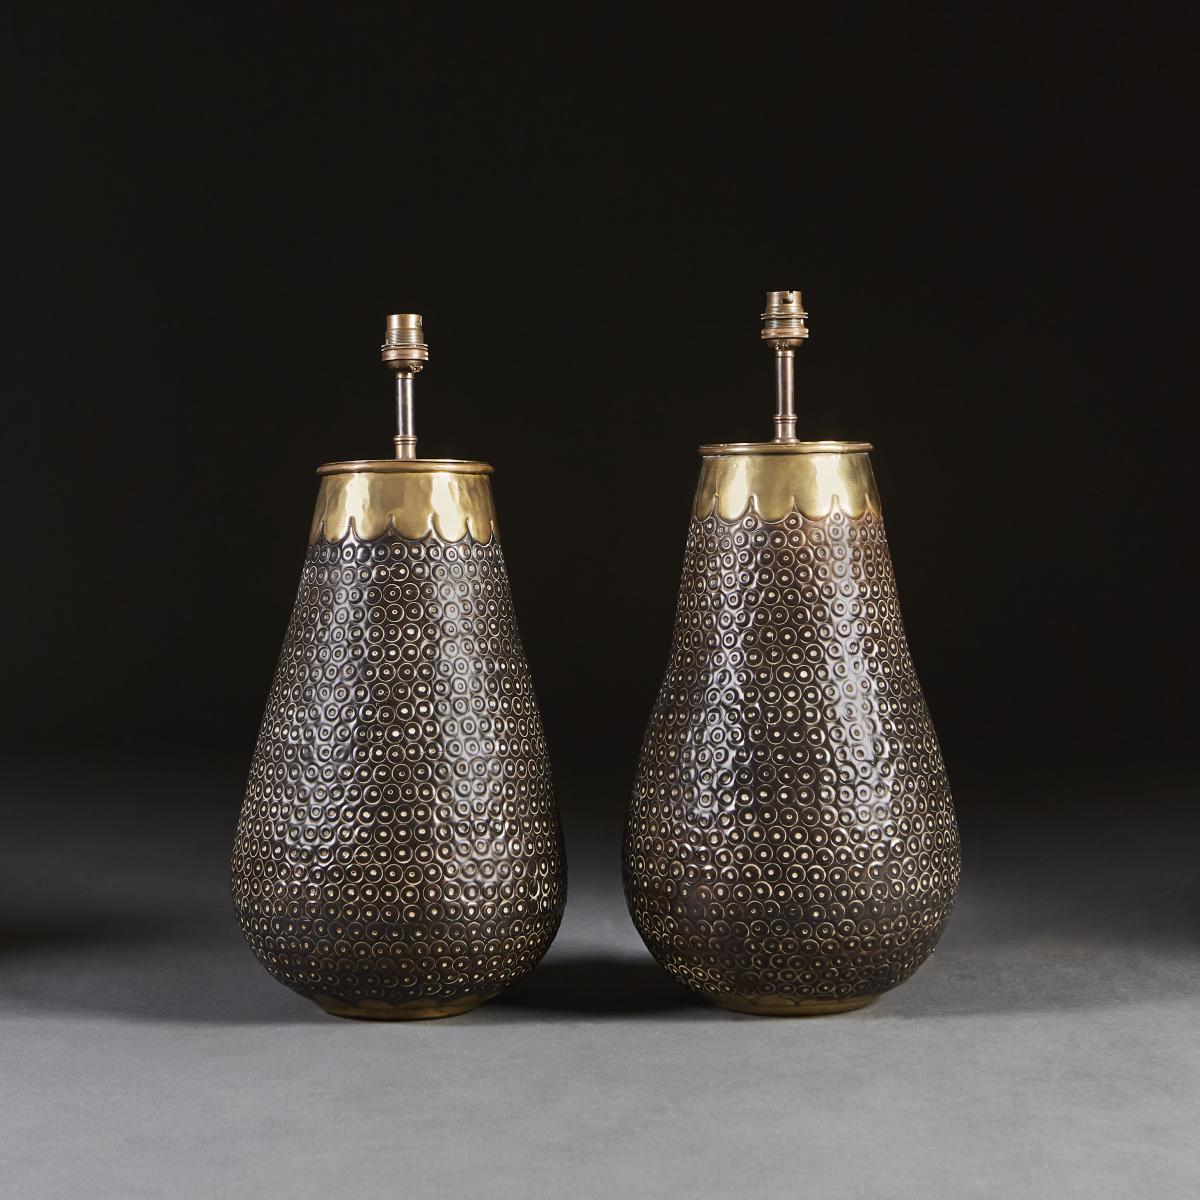 A Pair of Punched Metal Lamps with Brass Scallop Rims